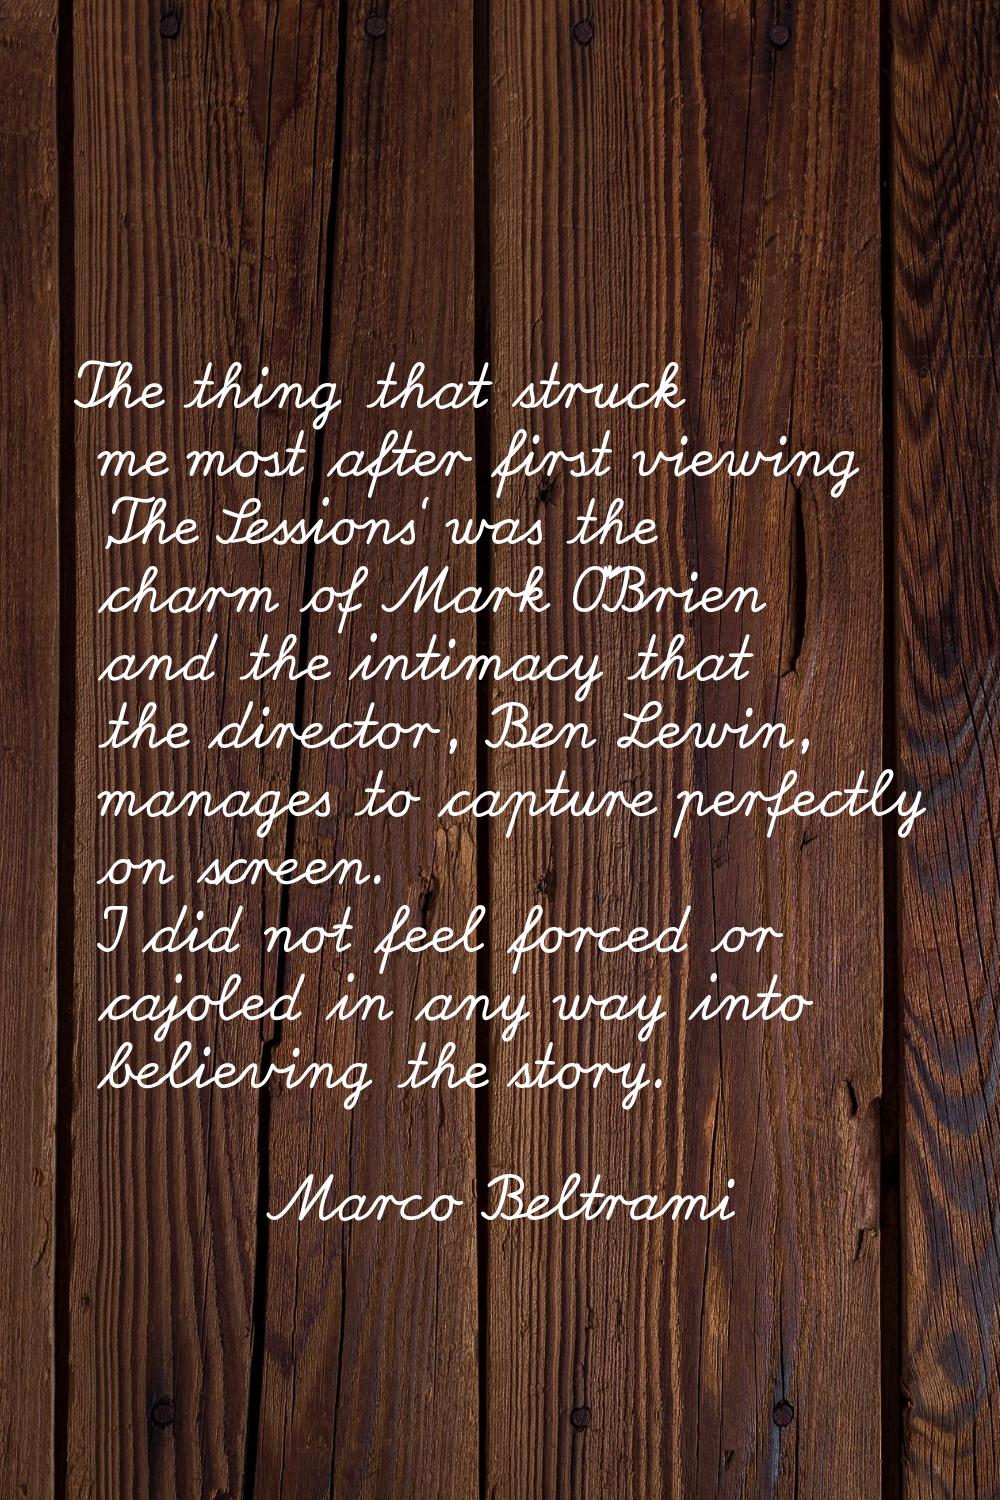 The thing that struck me most after first viewing 'The Sessions' was the charm of Mark O'Brien and 